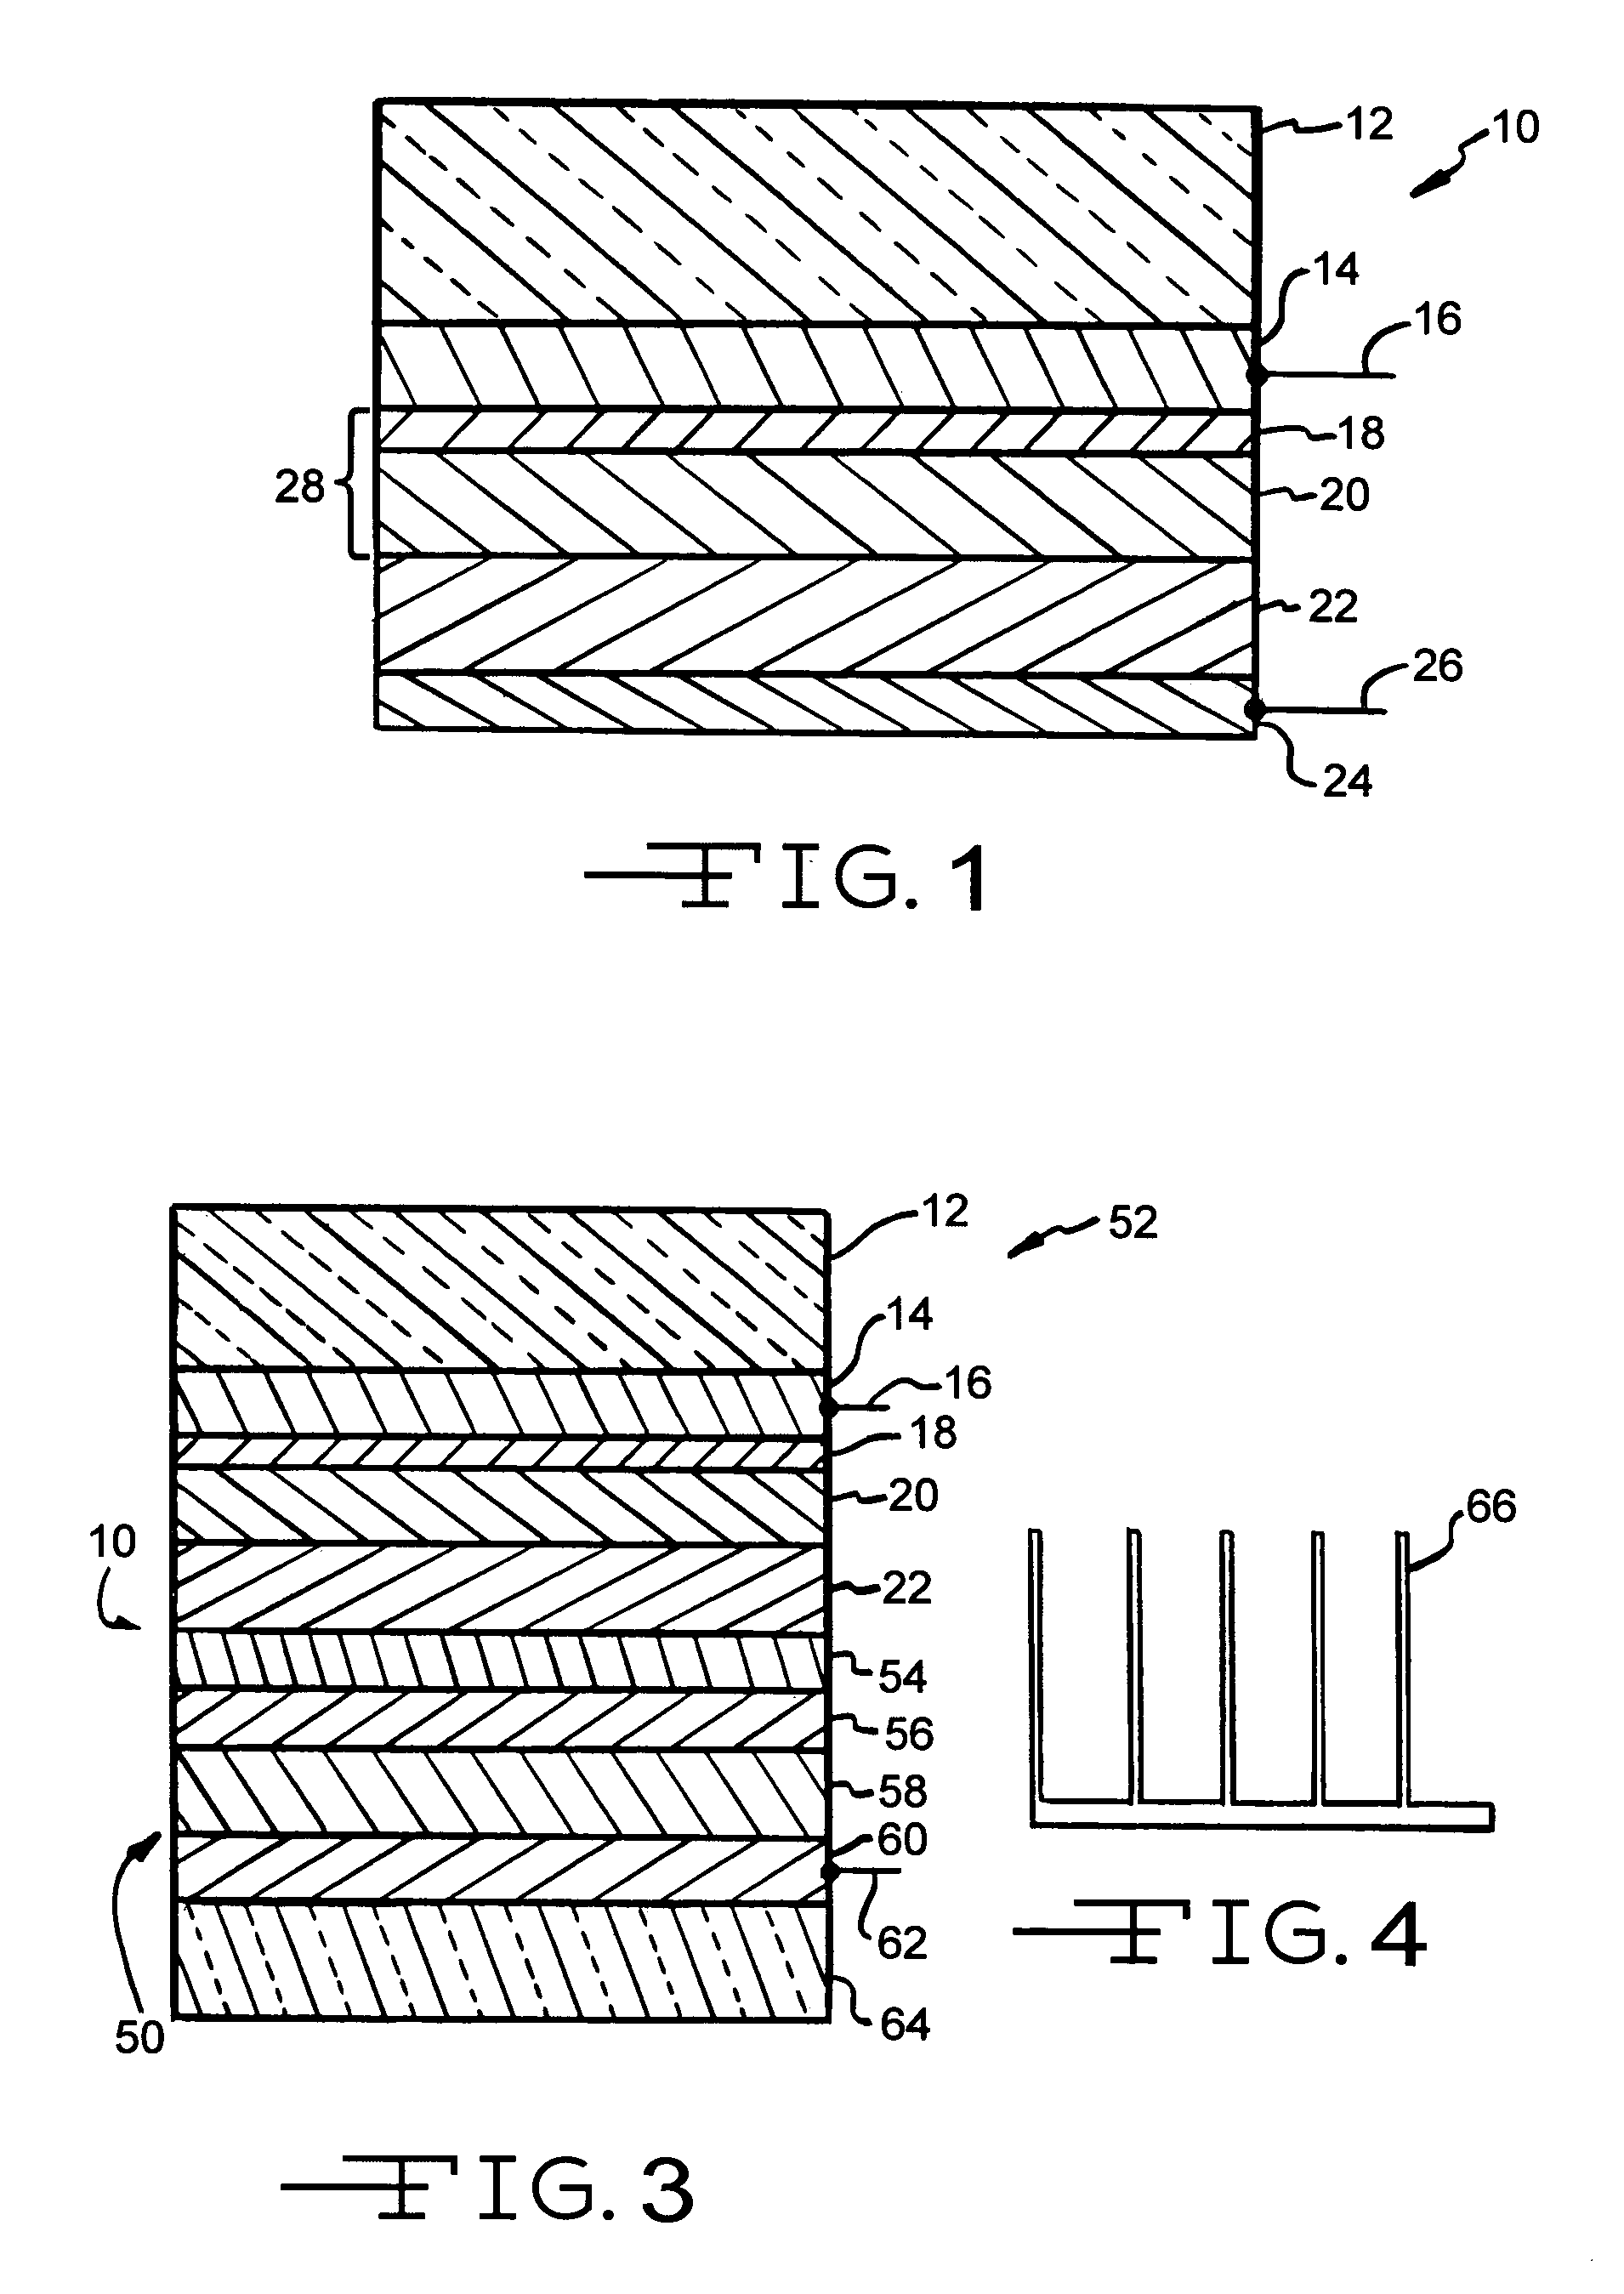 Method of making diode structures